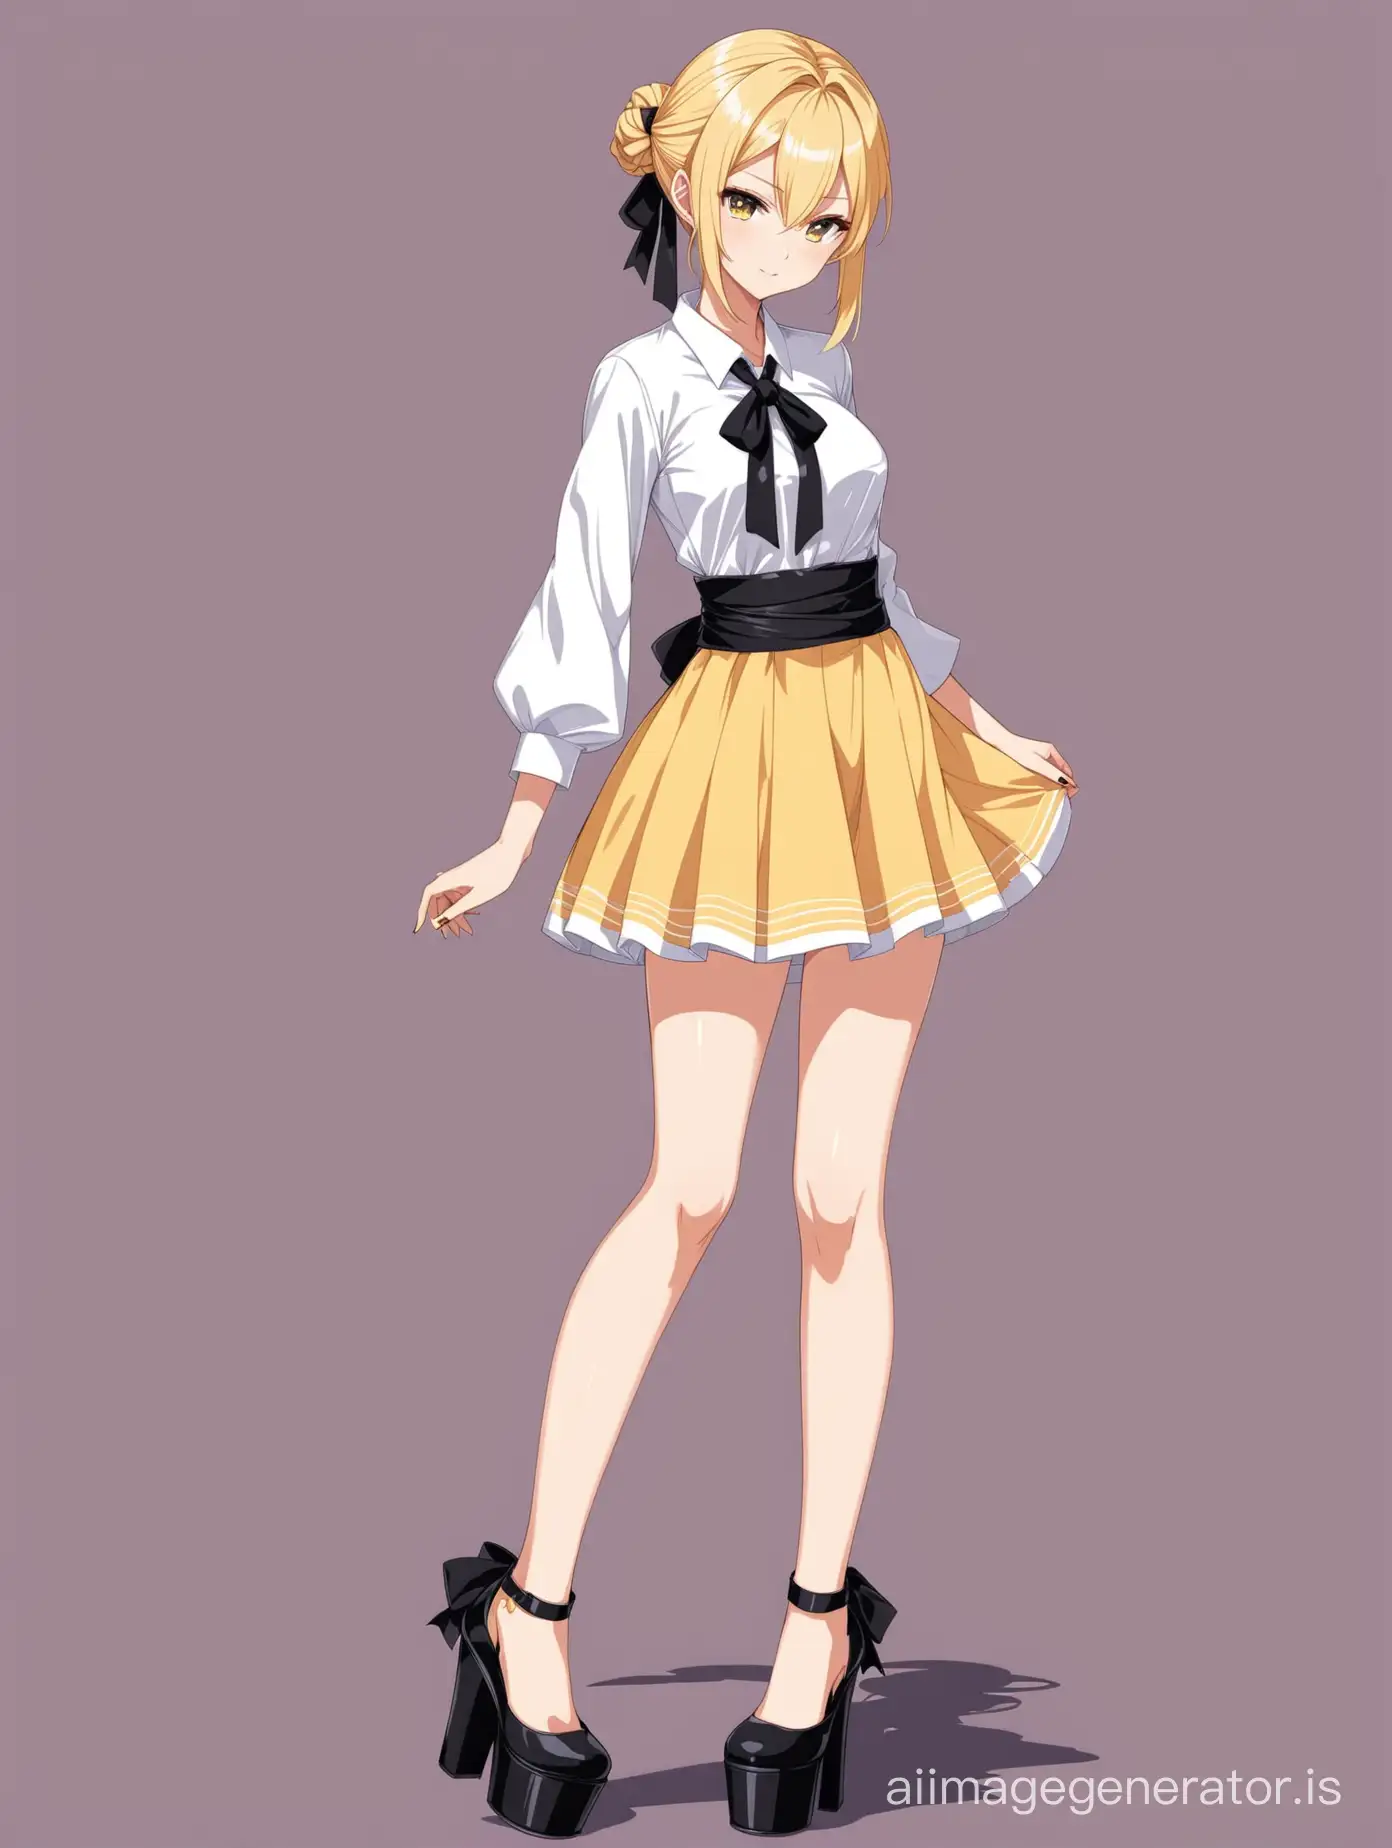 Full body image of a blonde anime maiden girl with tied hair wearing platform pumps high heels with ankle strip